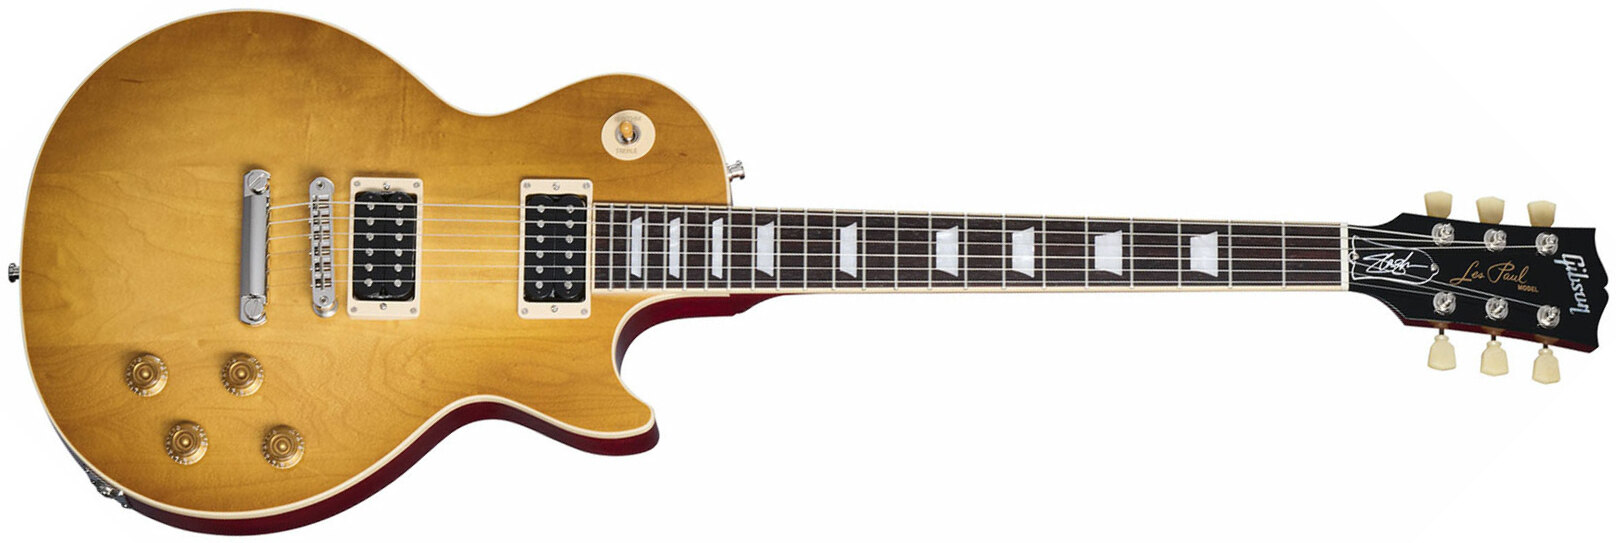 Gibson Slash Les Paul Standard Jessica Signature 2h Ht Rw - Honey Burst With Red Back - Single cut electric guitar - Main picture